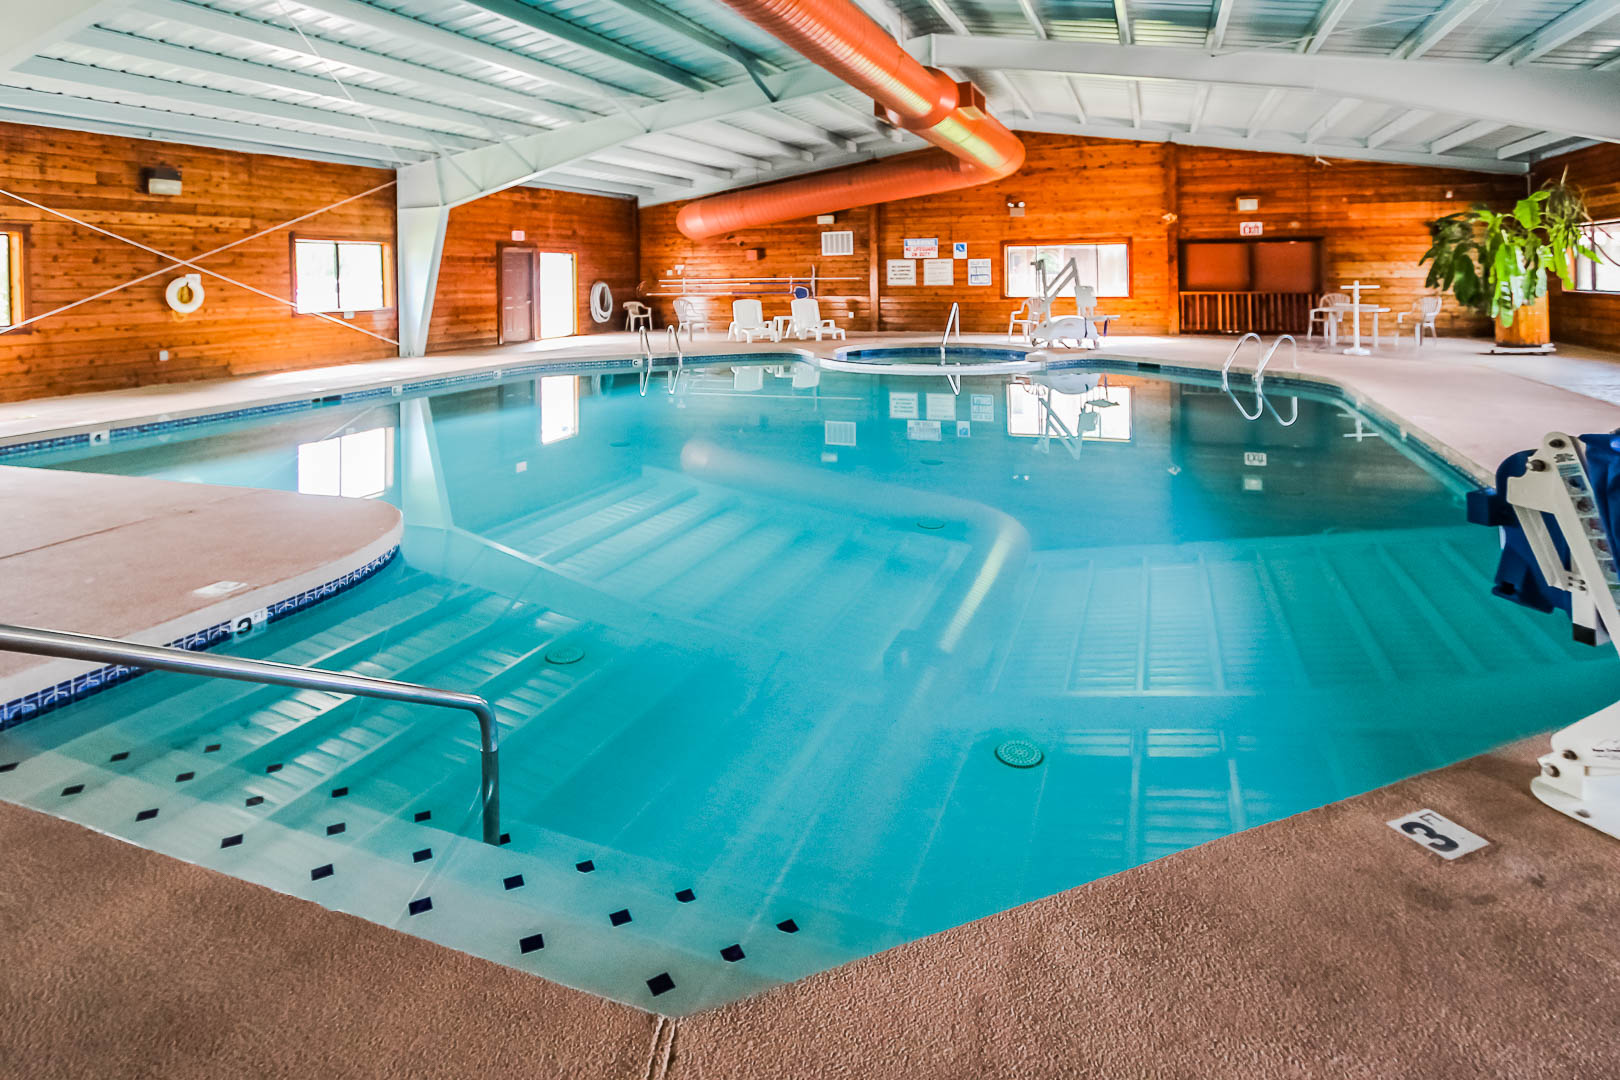 A clean indoor swimming pool at VRI's Roundhouse Resort in Pinetop, Arizona.